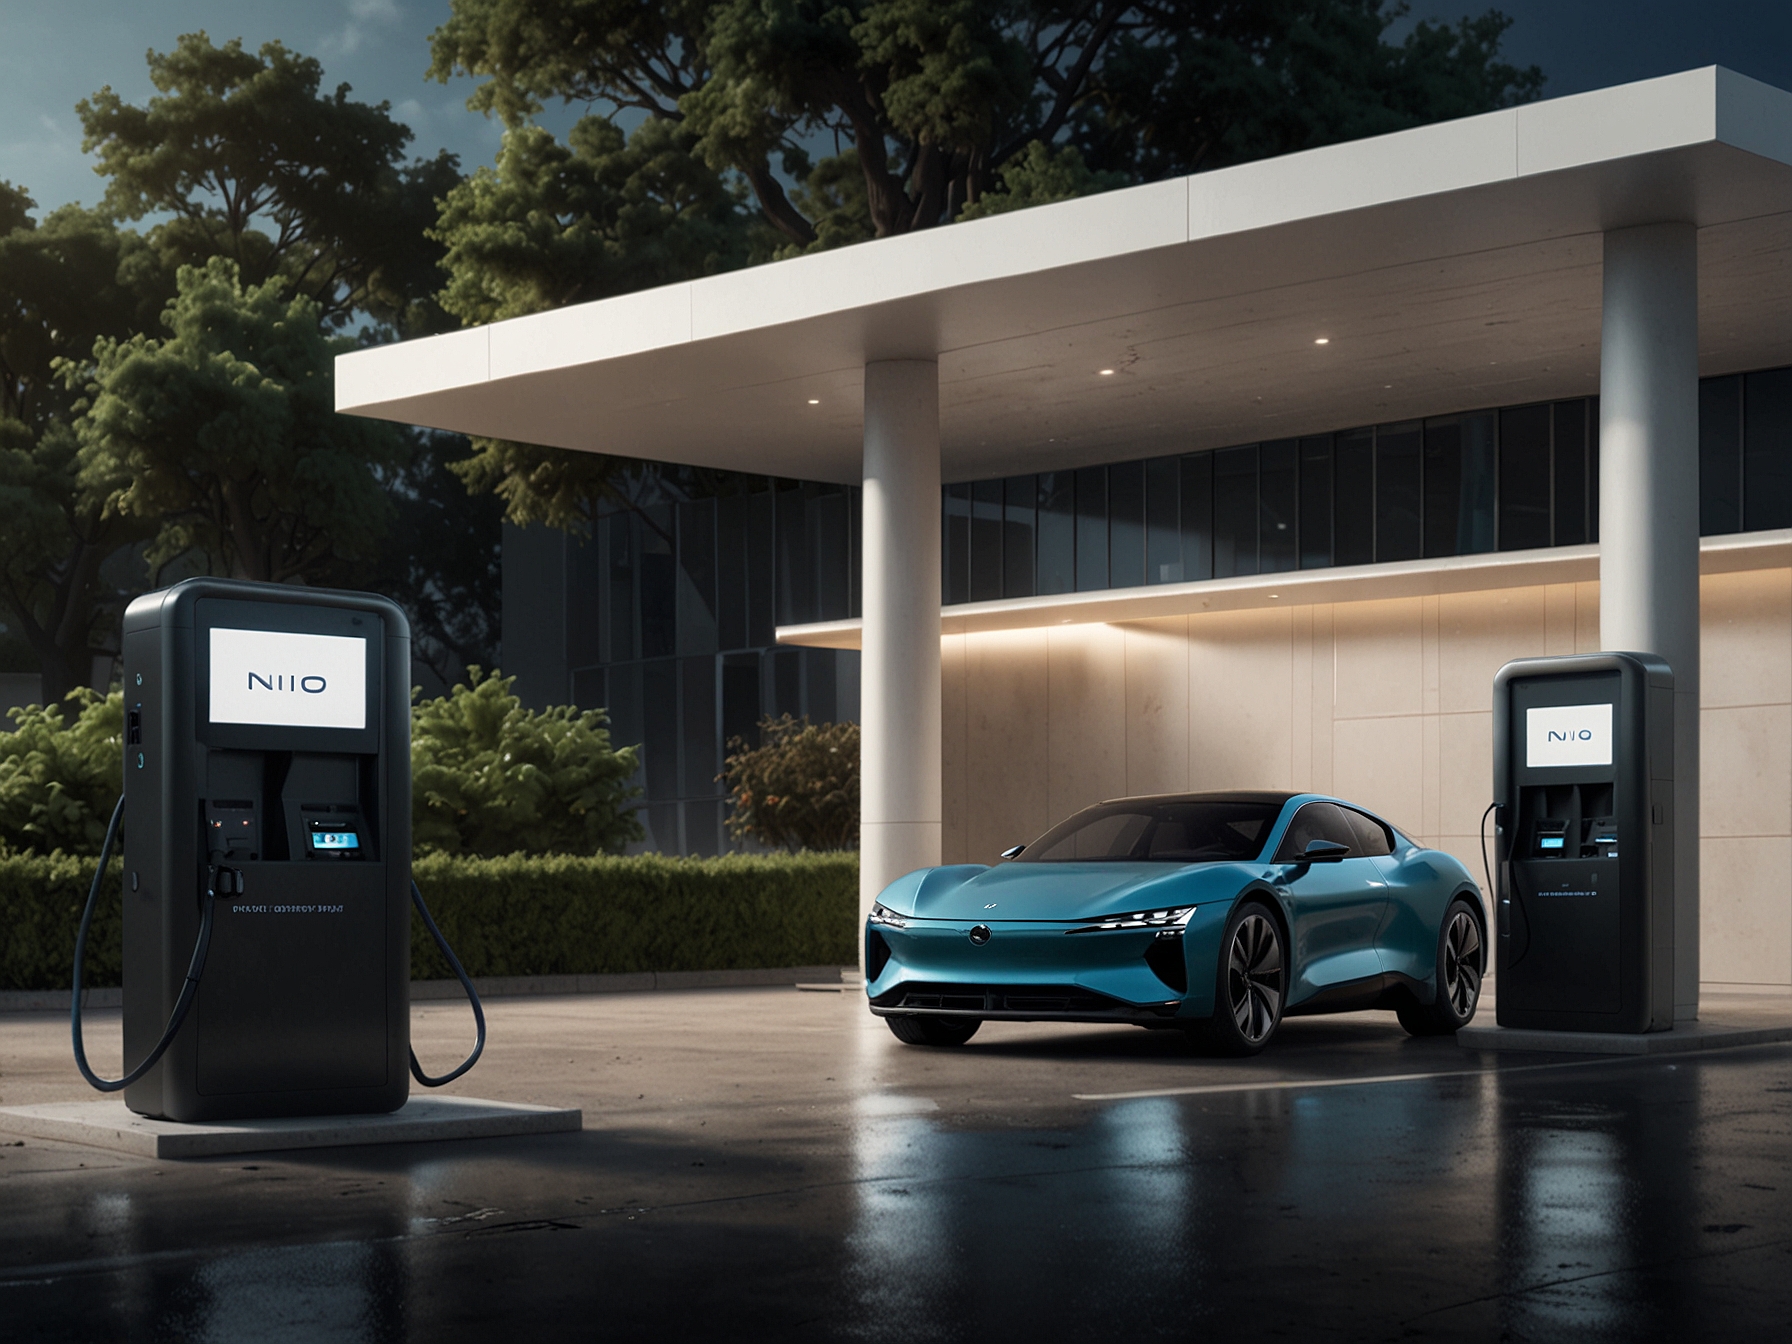 A visual representation of NIO’s Battery as a Service (BaaS) model with a NIO service station where vehicles are swapping batteries, emphasizing the convenience and cost-effectiveness of this subscription service.